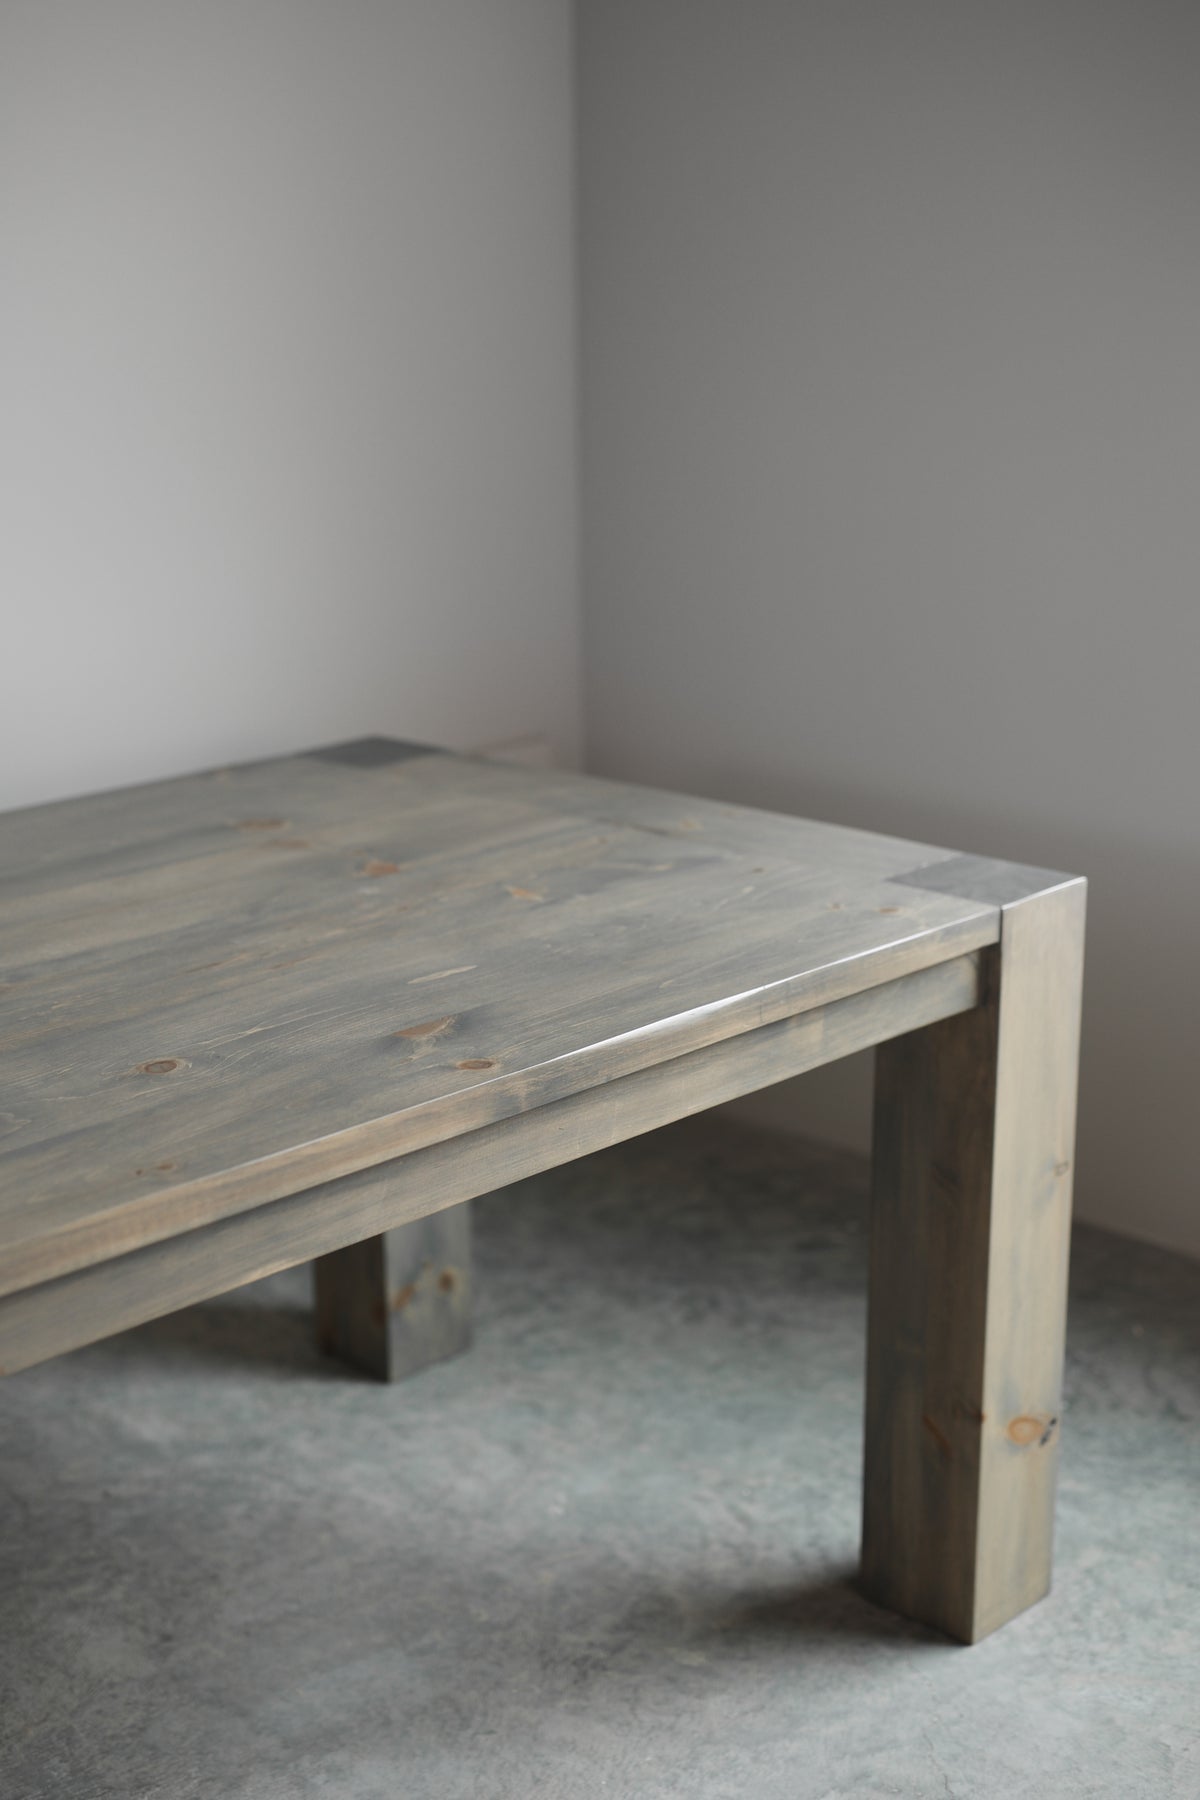 Nash Dining Table